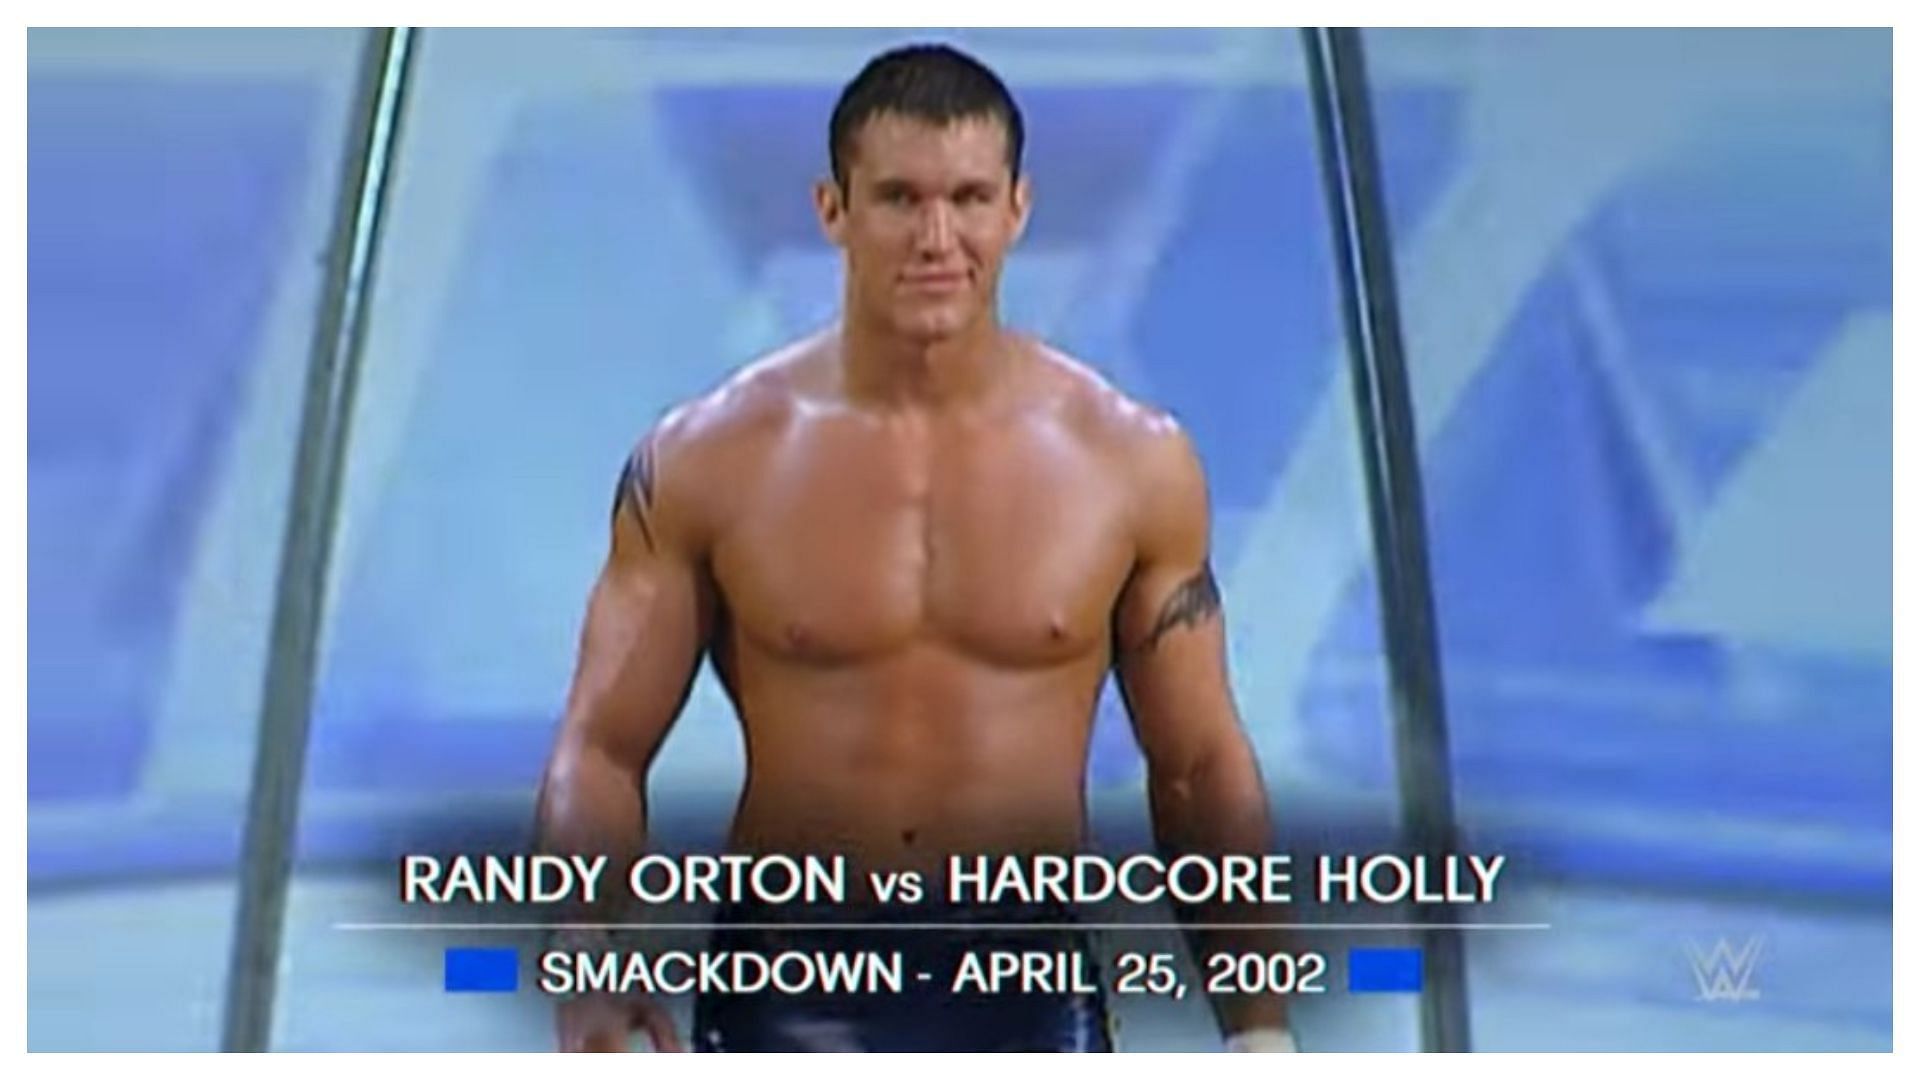 The third-generation superstar made his debut against Hardcore Holly